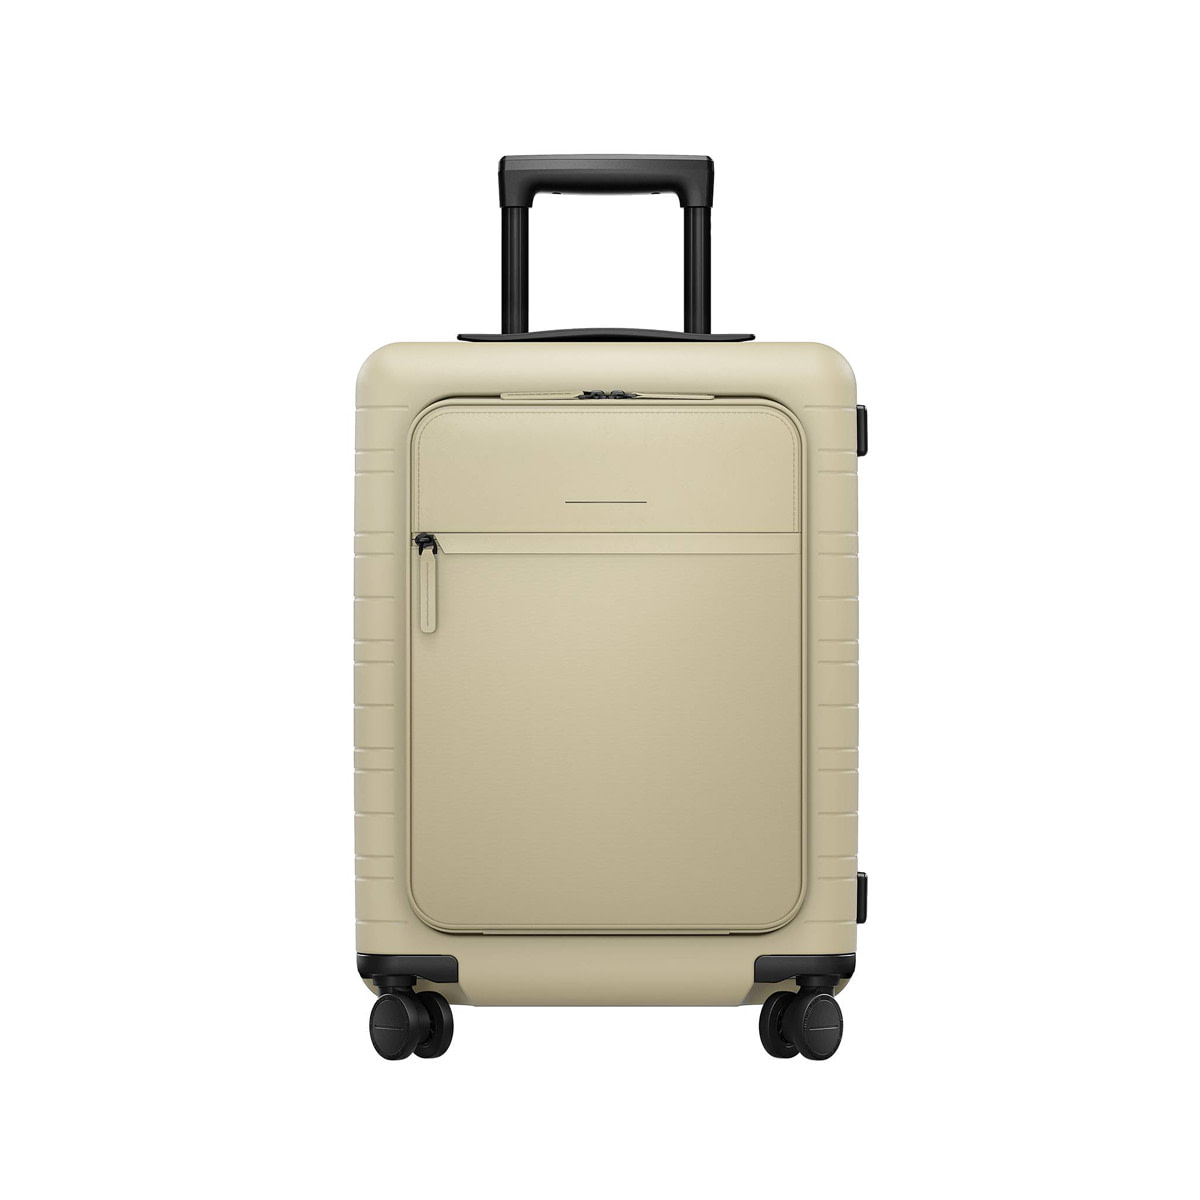 Best carry-on luggage for international travel